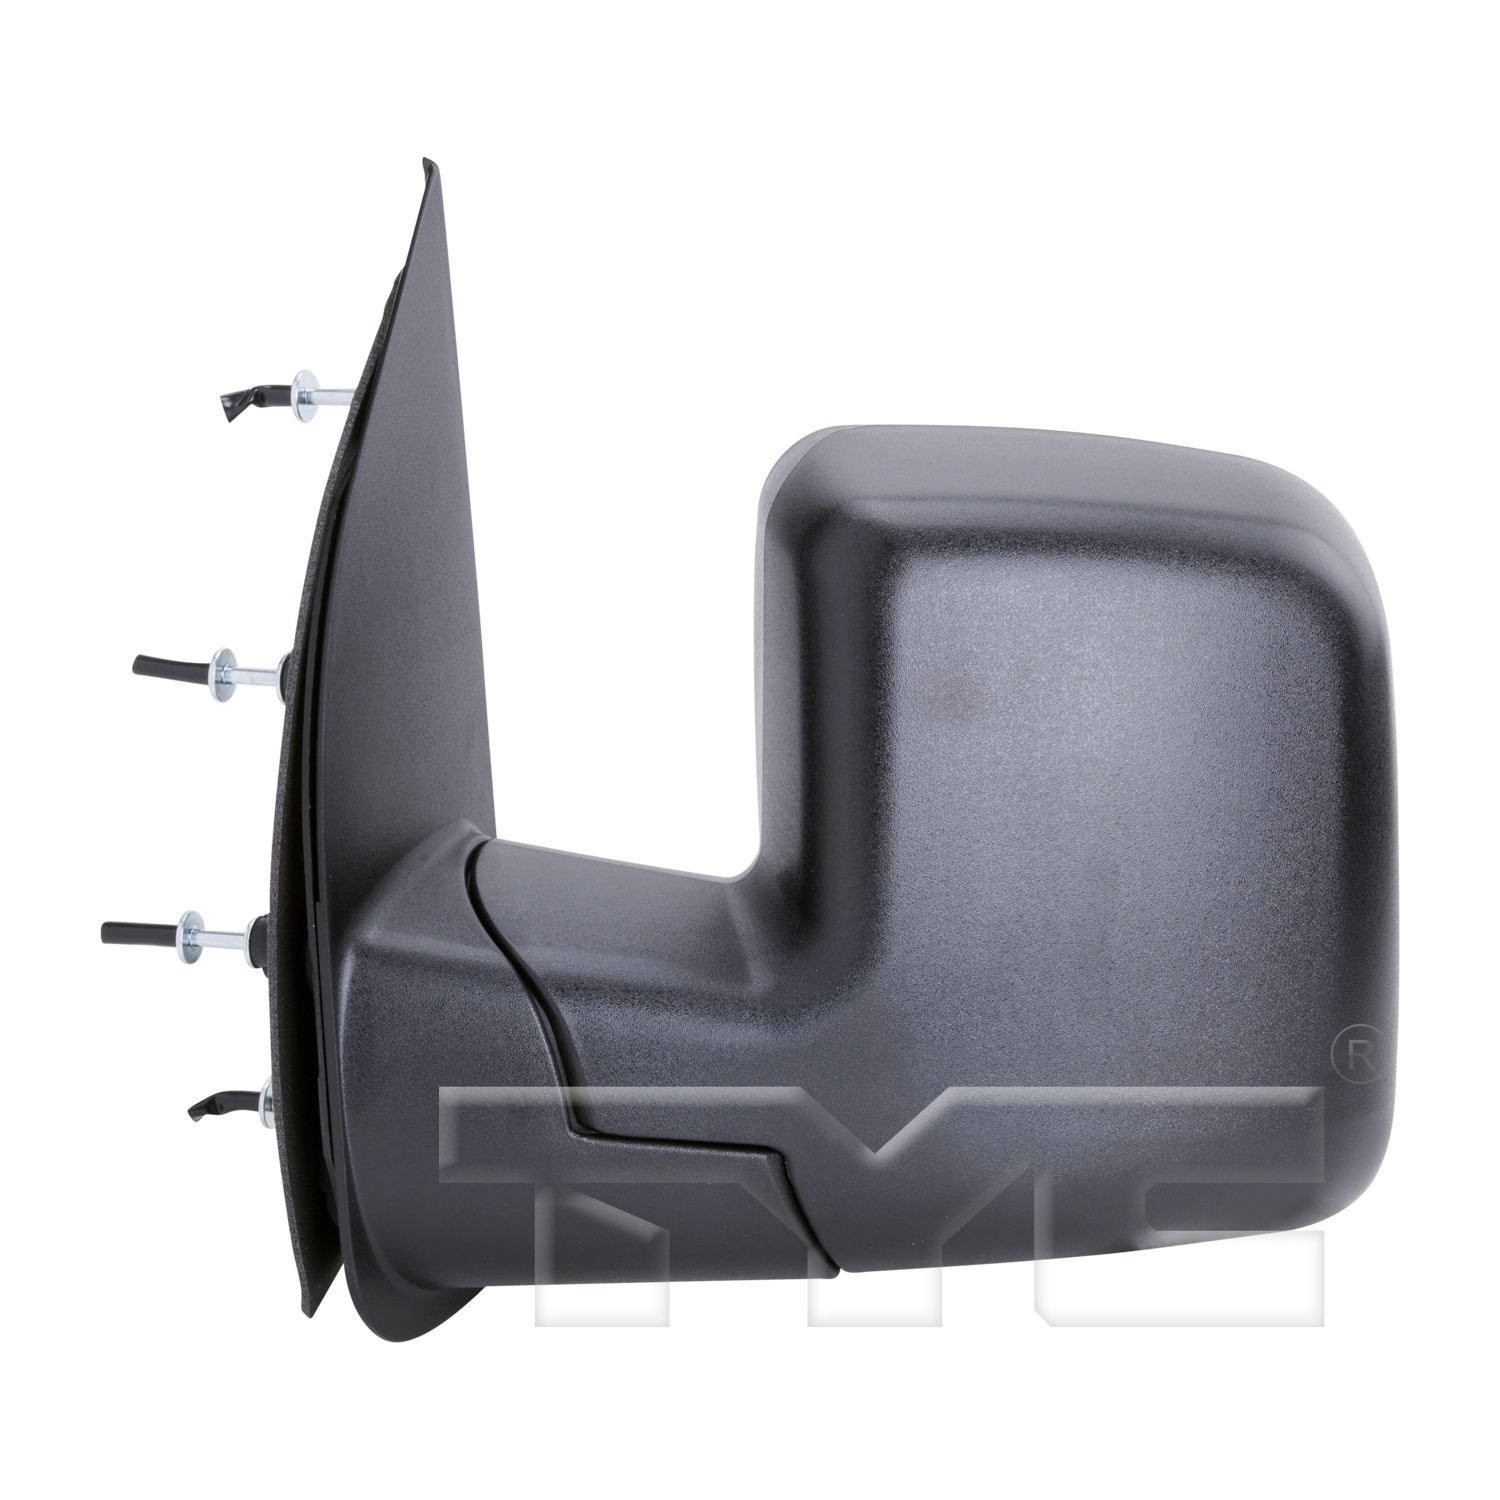 Aftermarket MIRRORS for FORD - E-450 ECONOLINE SUPER DUTY, E-450 ECONOLINE SUPER DUTY,02-02,LT Mirror outside rear view